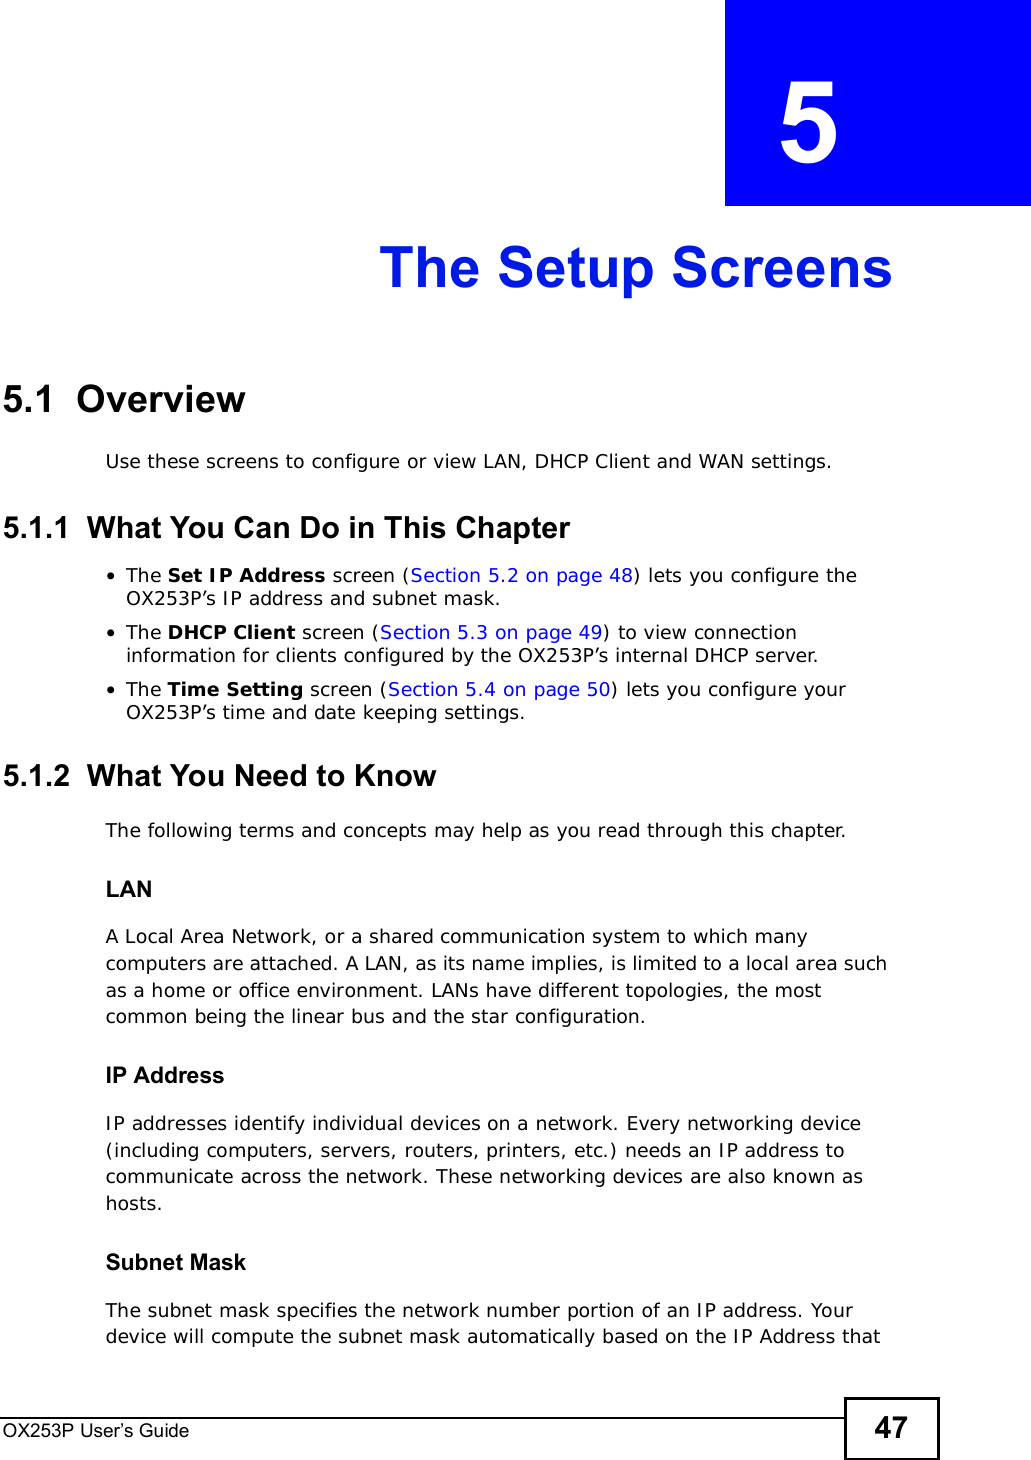 OX253P User’s Guide 47CHAPTER  5 The Setup Screens5.1  OverviewUse these screens to configure or view LAN, DHCP Client and WAN settings.5.1.1  What You Can Do in This Chapter•The Set IP Address screen (Section 5.2 on page 48) lets you configure the OX253P’s IP address and subnet mask.•The DHCP Client screen (Section 5.3 on page 49) to view connection information for clients configured by the OX253P’s internal DHCP server.•The Time Setting screen (Section 5.4 on page 50) lets you configure your OX253P’s time and date keeping settings.5.1.2  What You Need to KnowThe following terms and concepts may help as you read through this chapter.LANA Local Area Network, or a shared communication system to which many computers are attached. A LAN, as its name implies, is limited to a local area such as a home or office environment. LANs have different topologies, the most common being the linear bus and the star configuration.IP AddressIP addresses identify individual devices on a network. Every networking device (including computers, servers, routers, printers, etc.) needs an IP address to communicate across the network. These networking devices are also known as hosts.Subnet MaskThe subnet mask specifies the network number portion of an IP address. Your device will compute the subnet mask automatically based on the IP Address that 